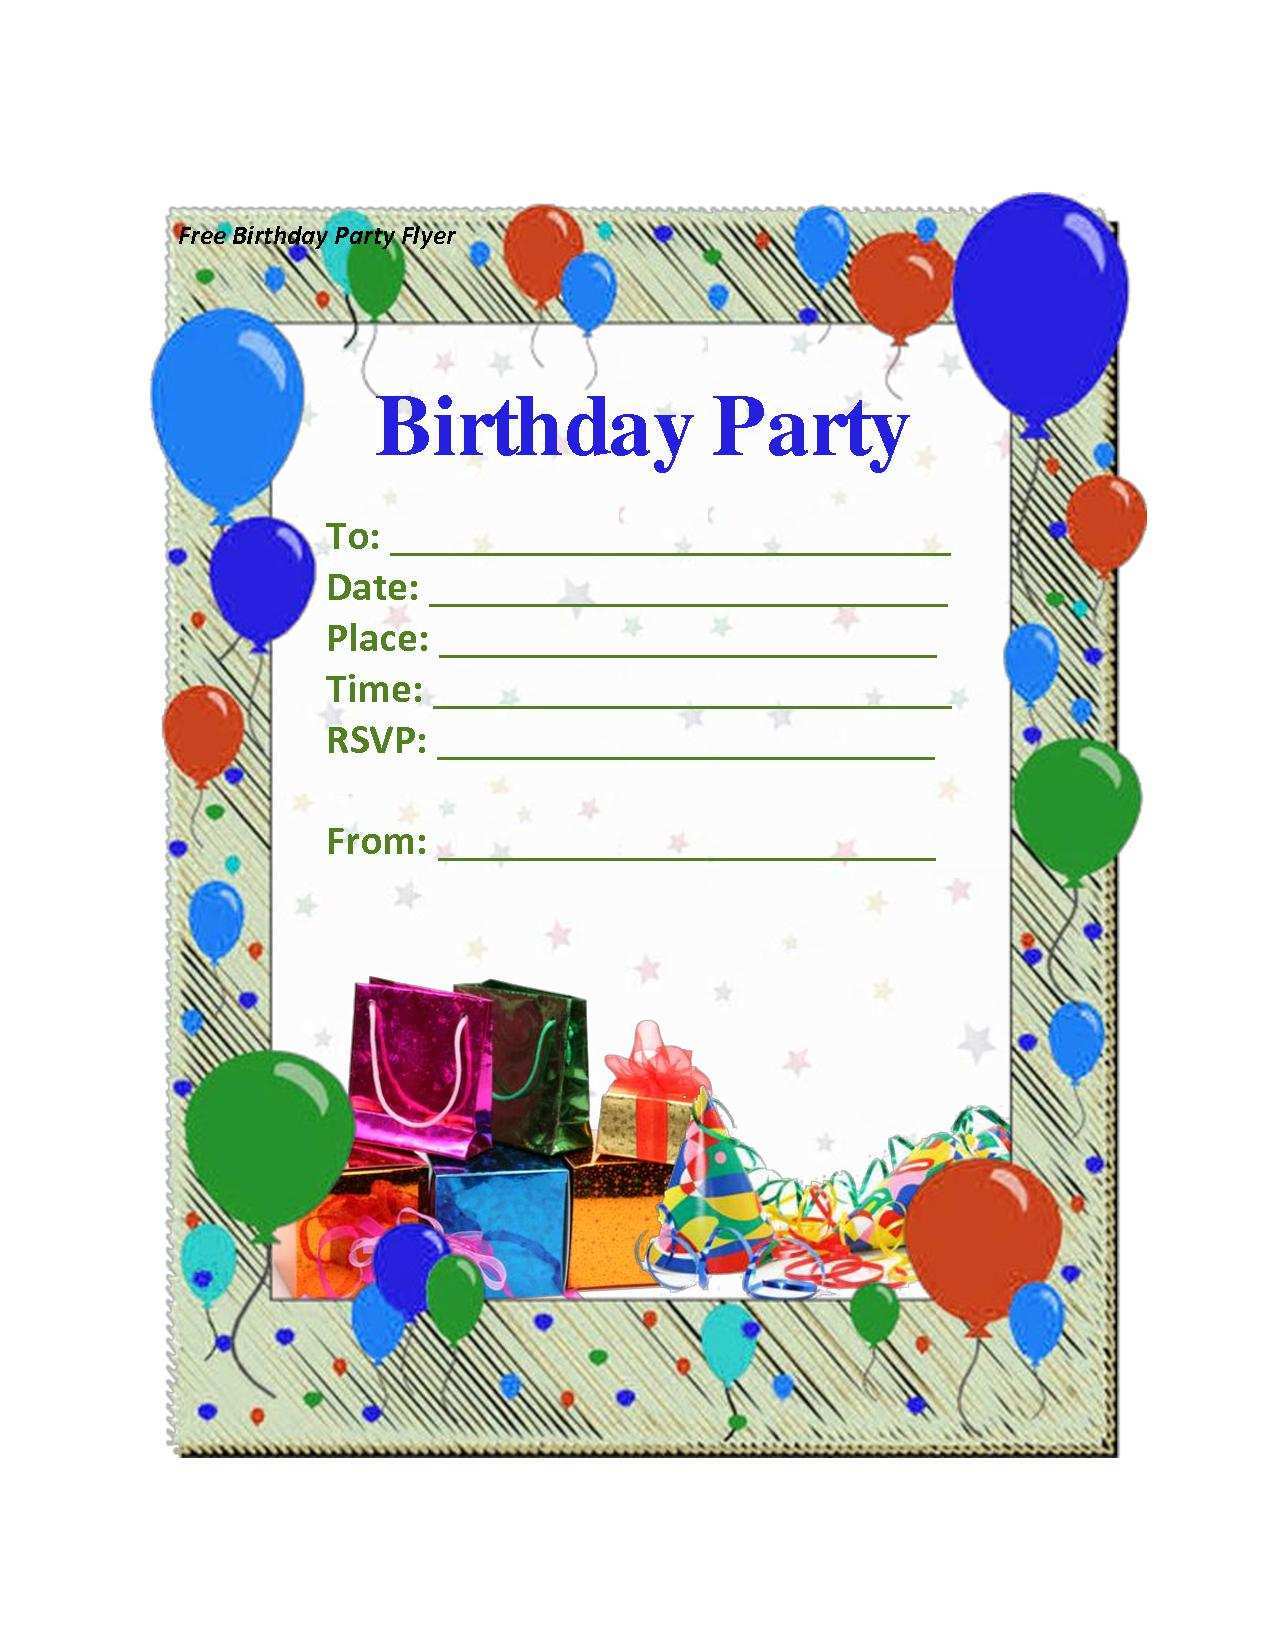 view-38-invitation-card-for-birthday-party-online